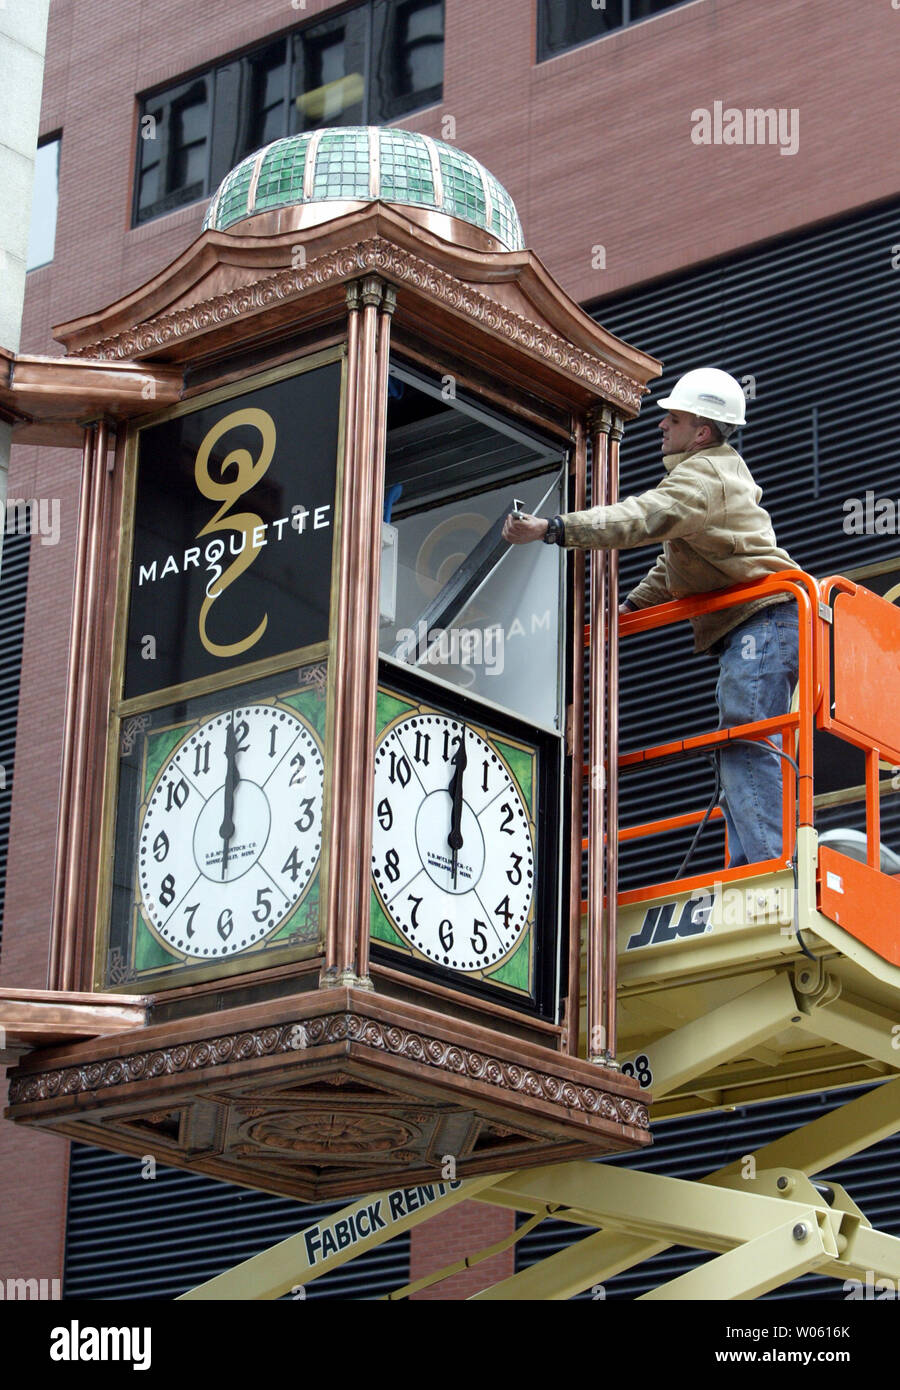 Greg Kutz of Elements by Greg of Beaufort, MO removes a metal beam from inside a large 80-year old clock during re-installation onto the Marquette Building in downtown St. Louis on March 21, 2005. The 2000-pound original McClintock clock was removed about three months ago and has been rebuilt at a cost of $30 thousand. (UPI Photo/Bill Greenblatt) Stock Photo